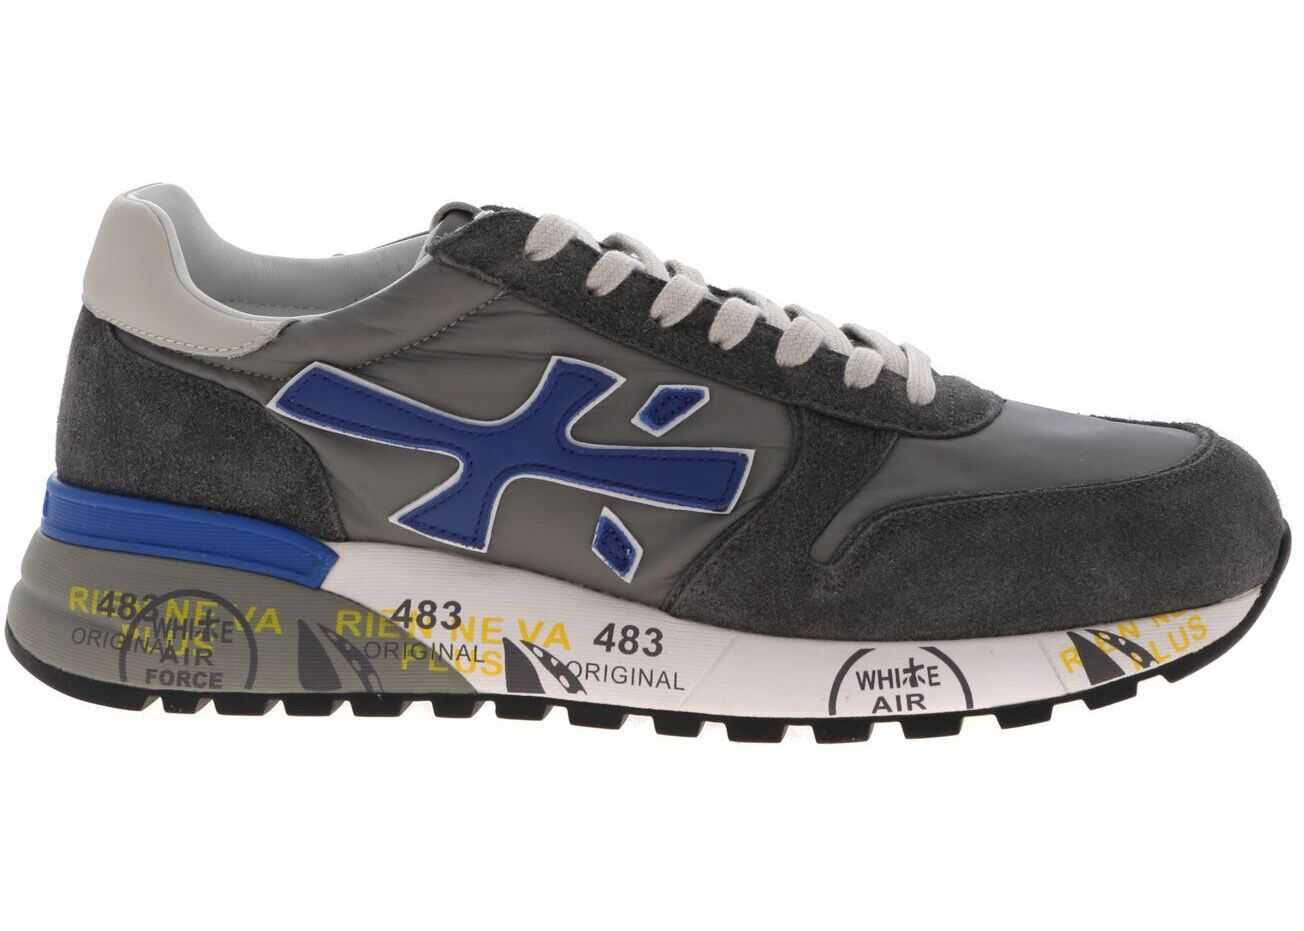 Premiata Mick Suede Sneakers In Grey And Blue MICK 4563 Grey